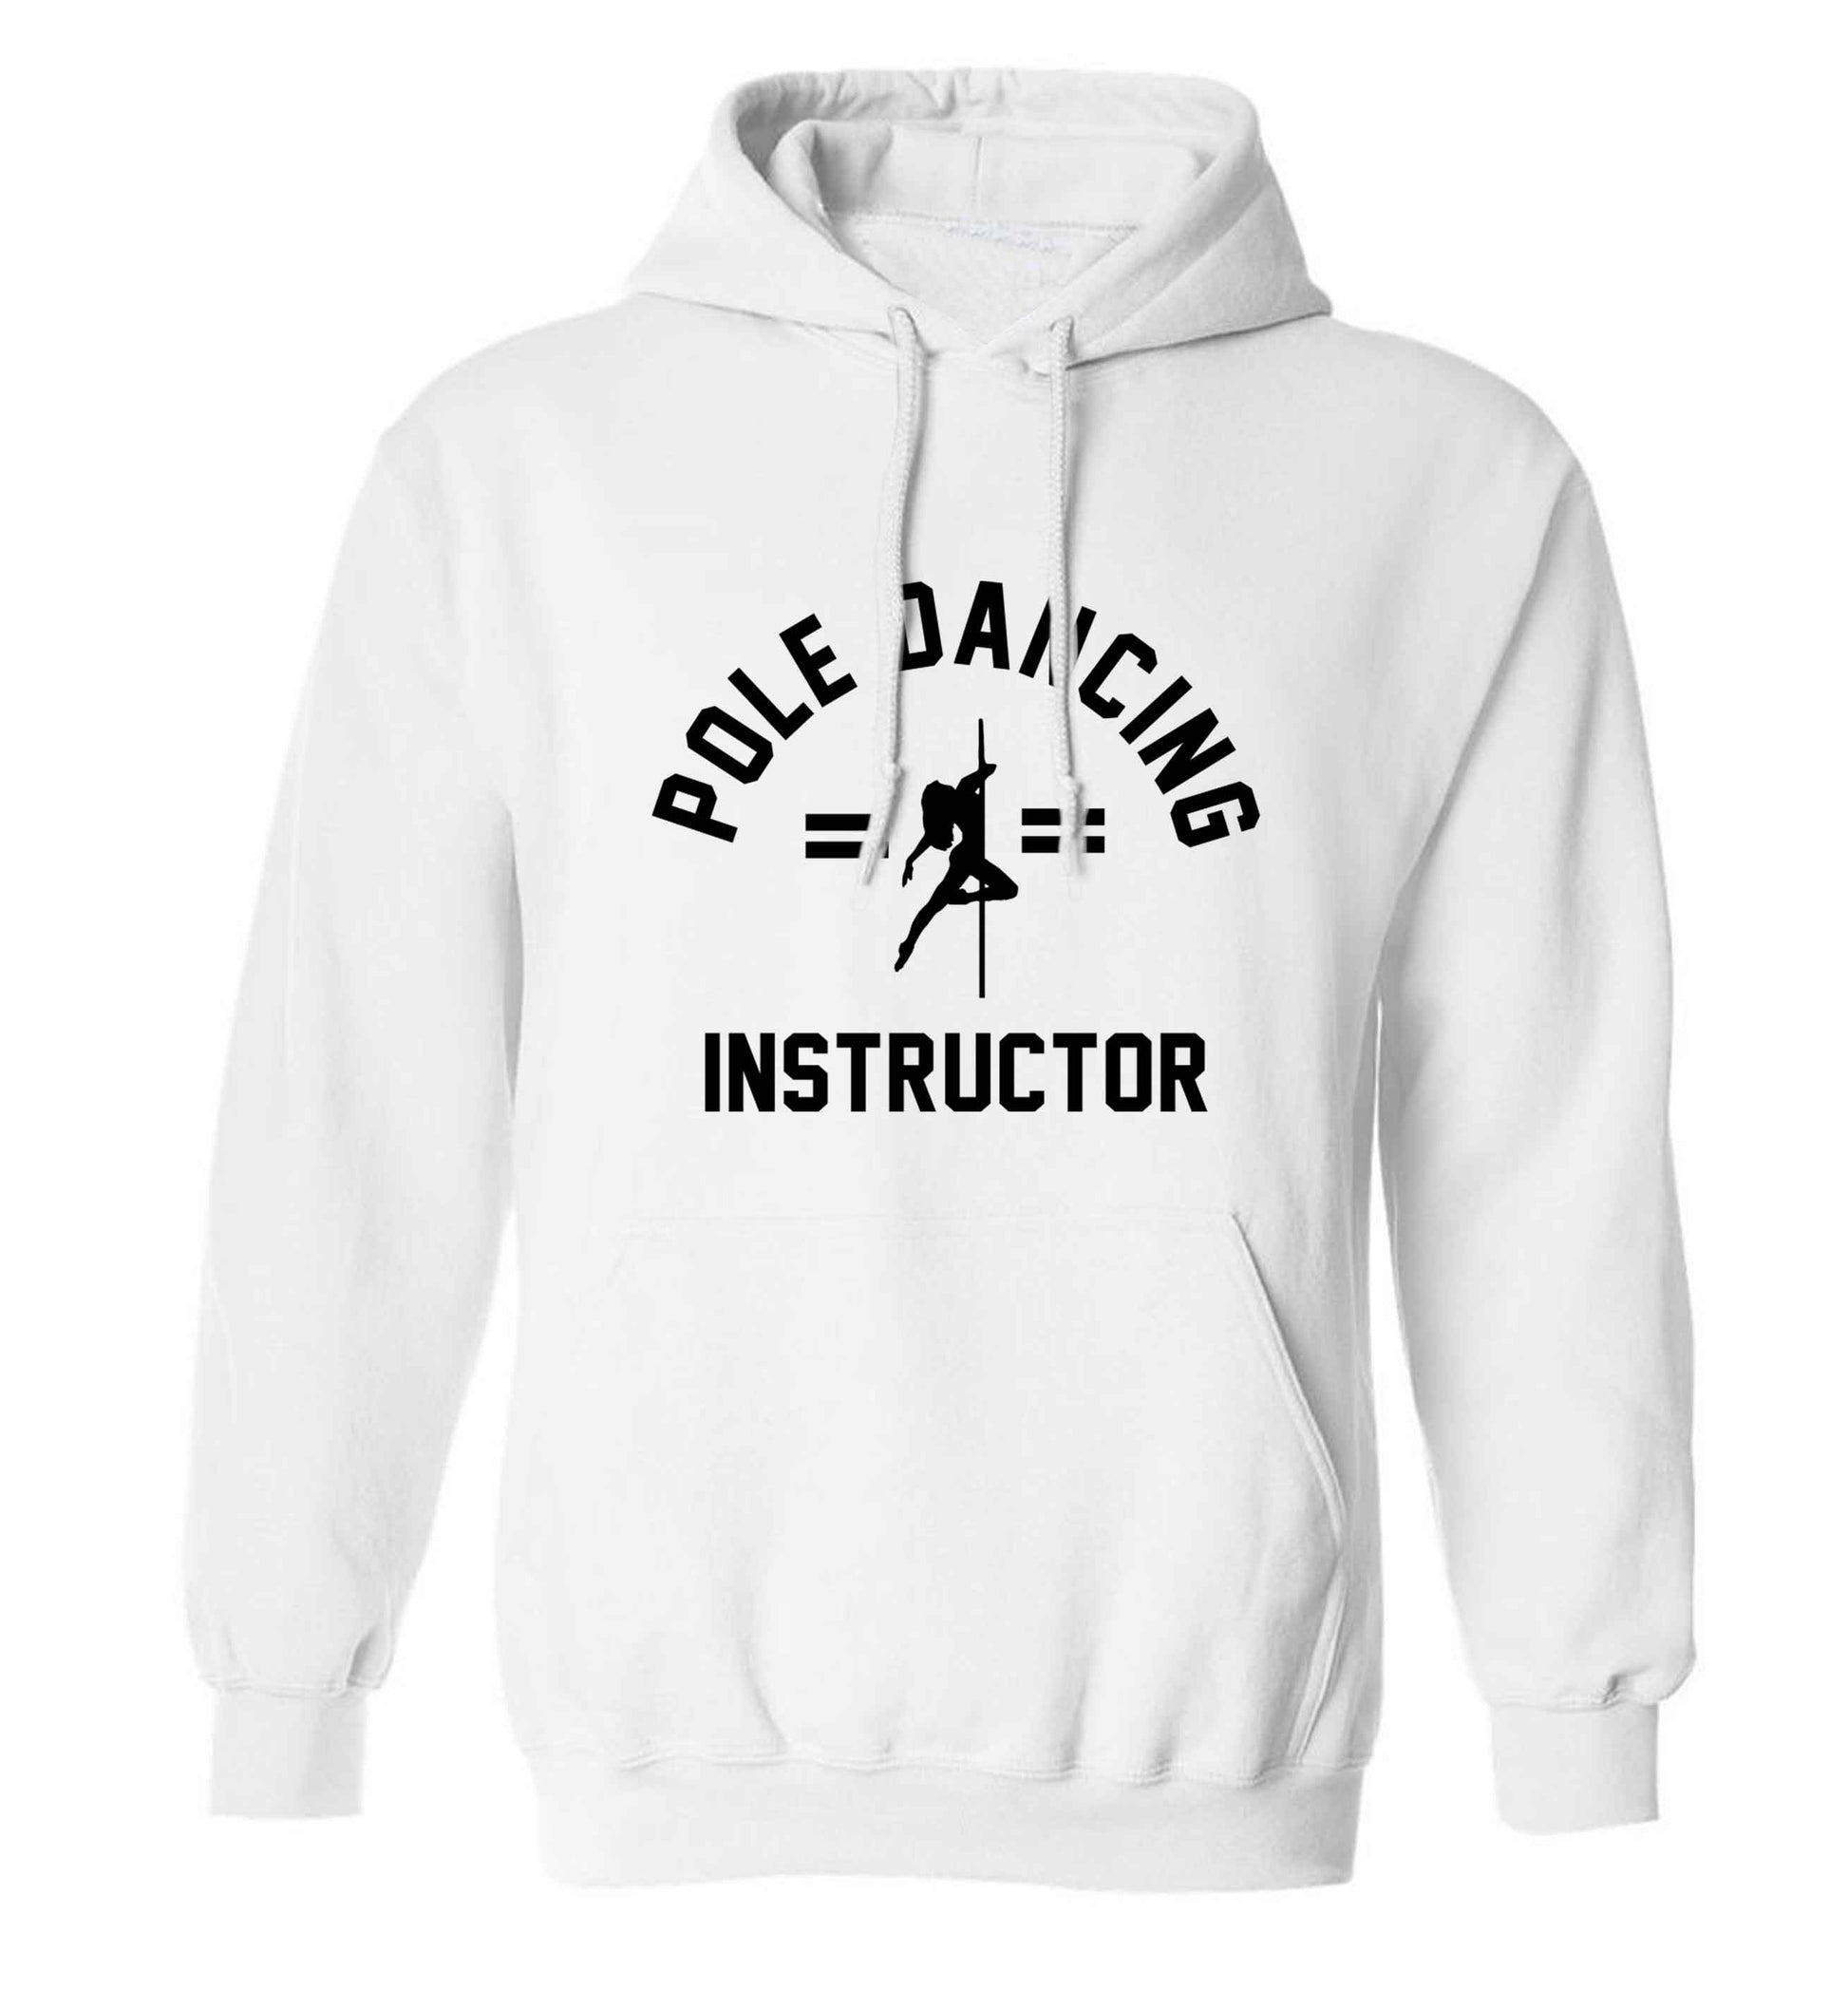 Pole dancing instructor adults unisex white hoodie 2XL